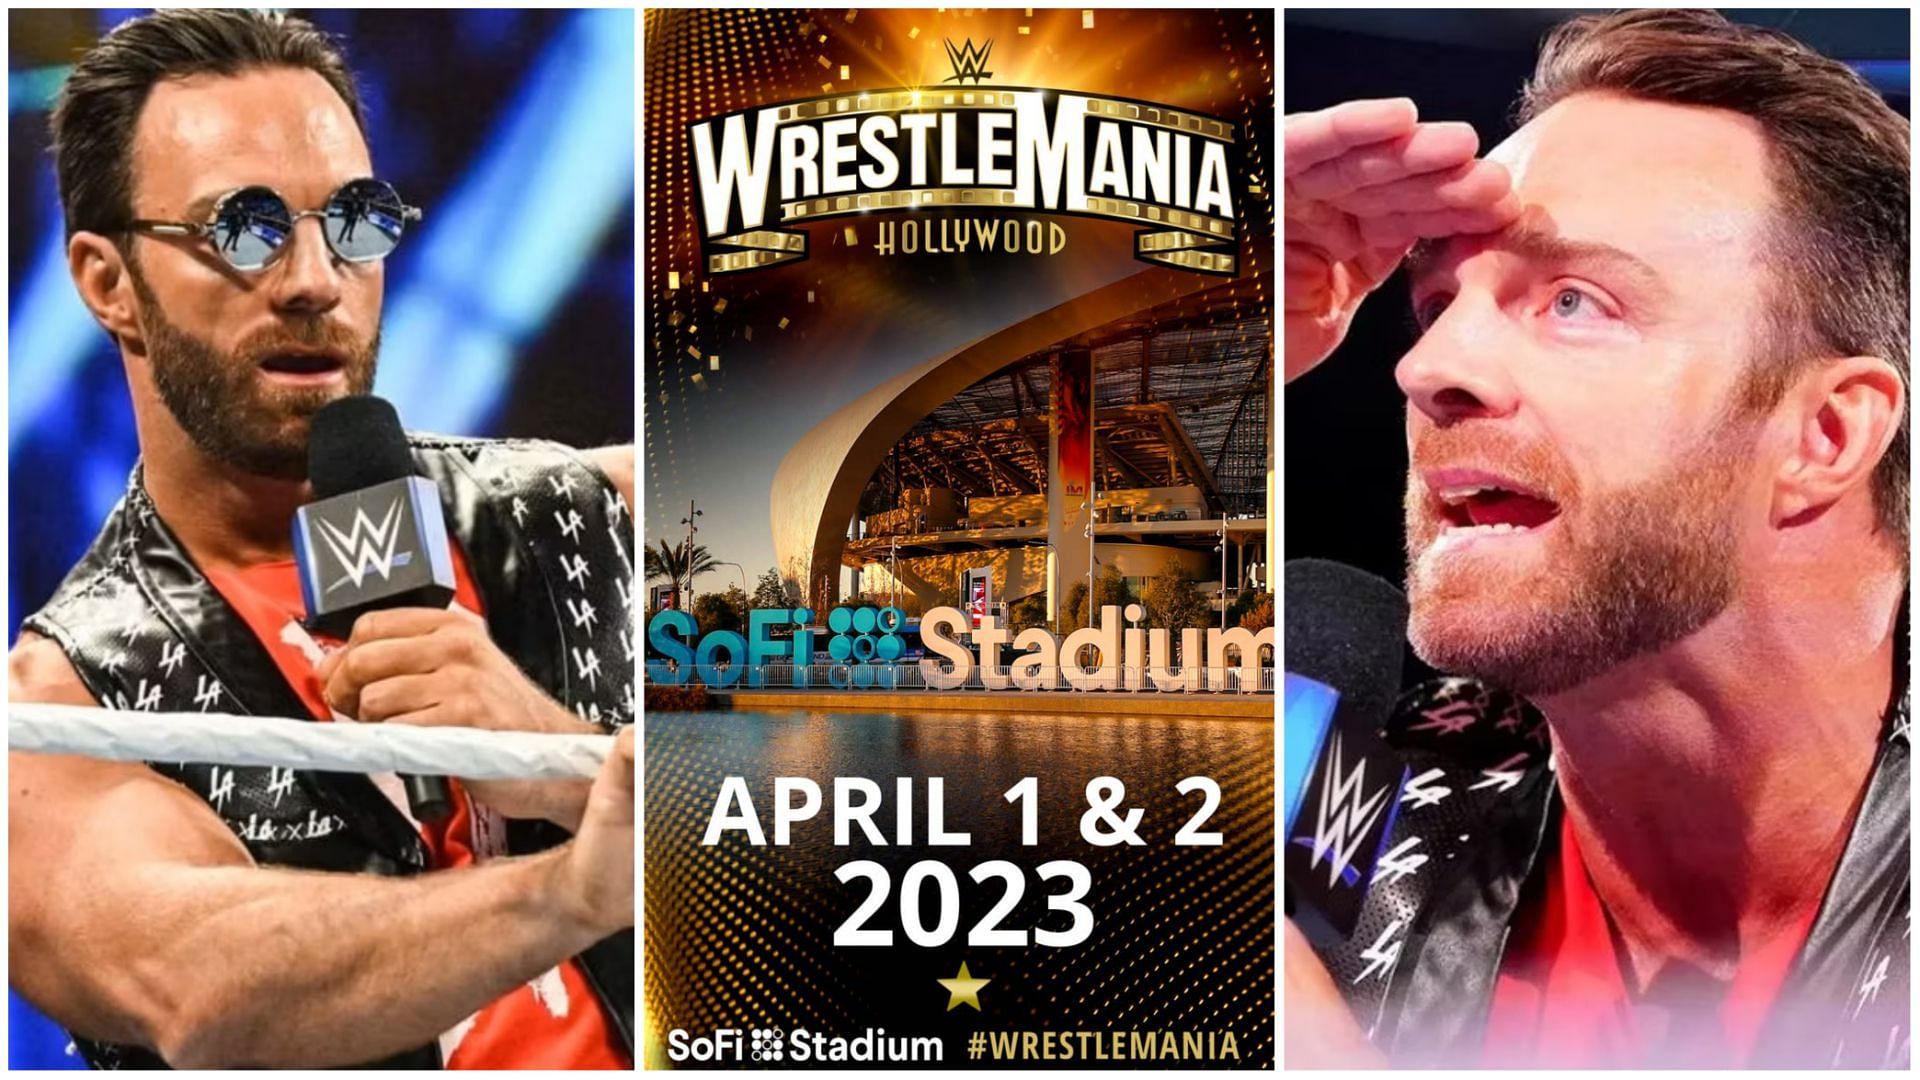 WWE Superstar LA Knight wants to be featured at WrestleMania 39